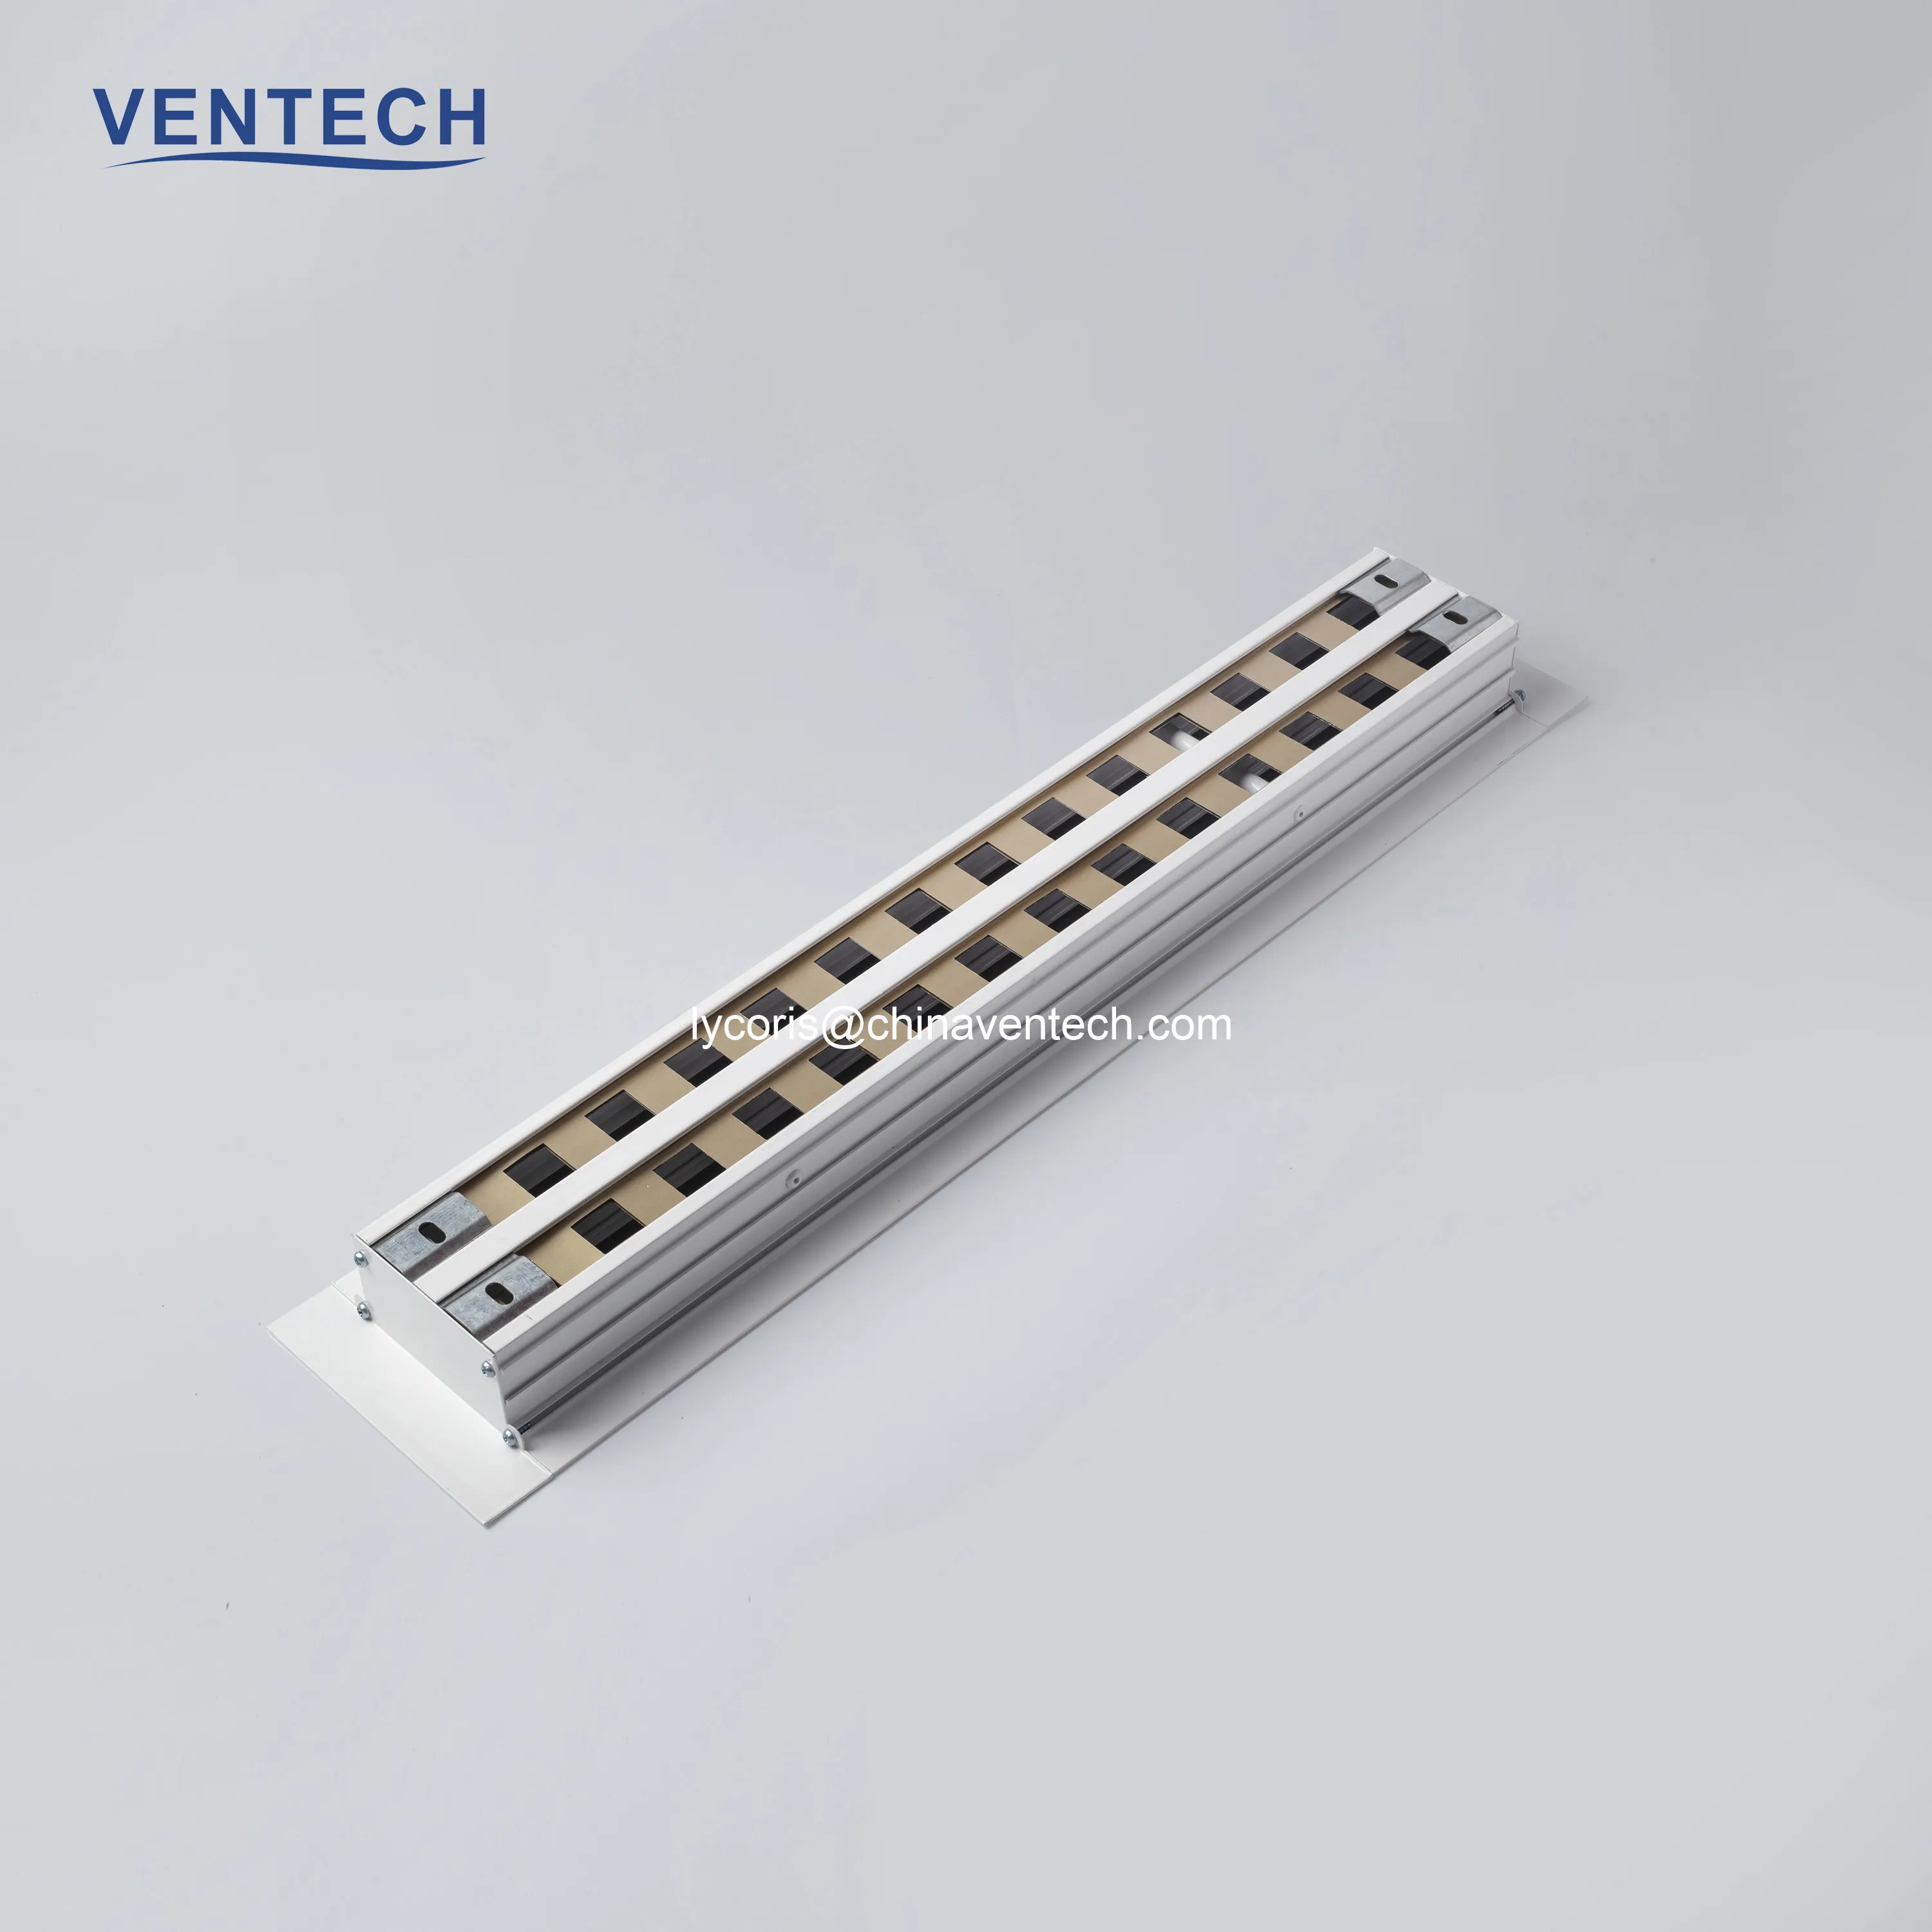 air conditioning linear slot diffuser bar grille ceiling ventilation diffuser plenum box adaptor supply linear grilles diffusers